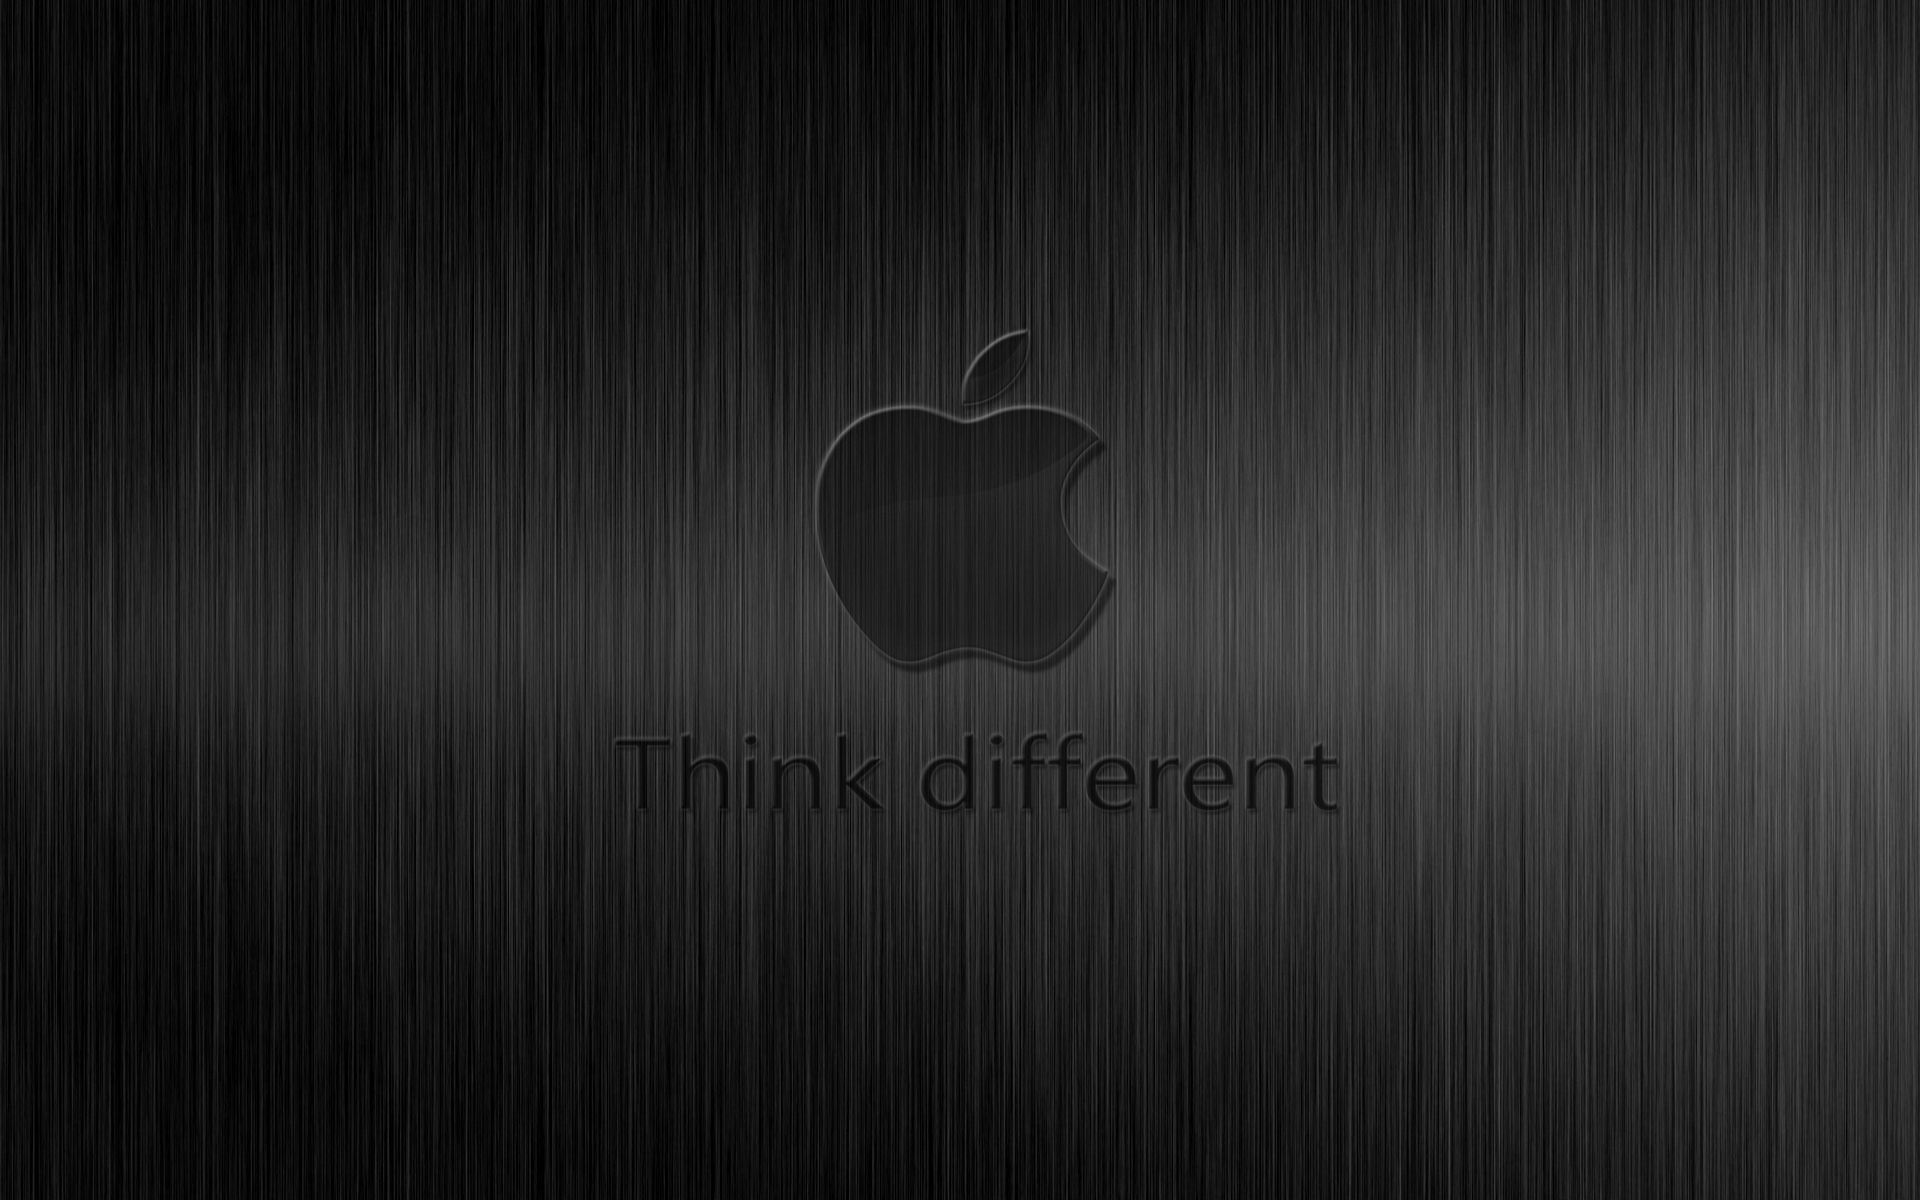 Think Different Apple Wallpapers